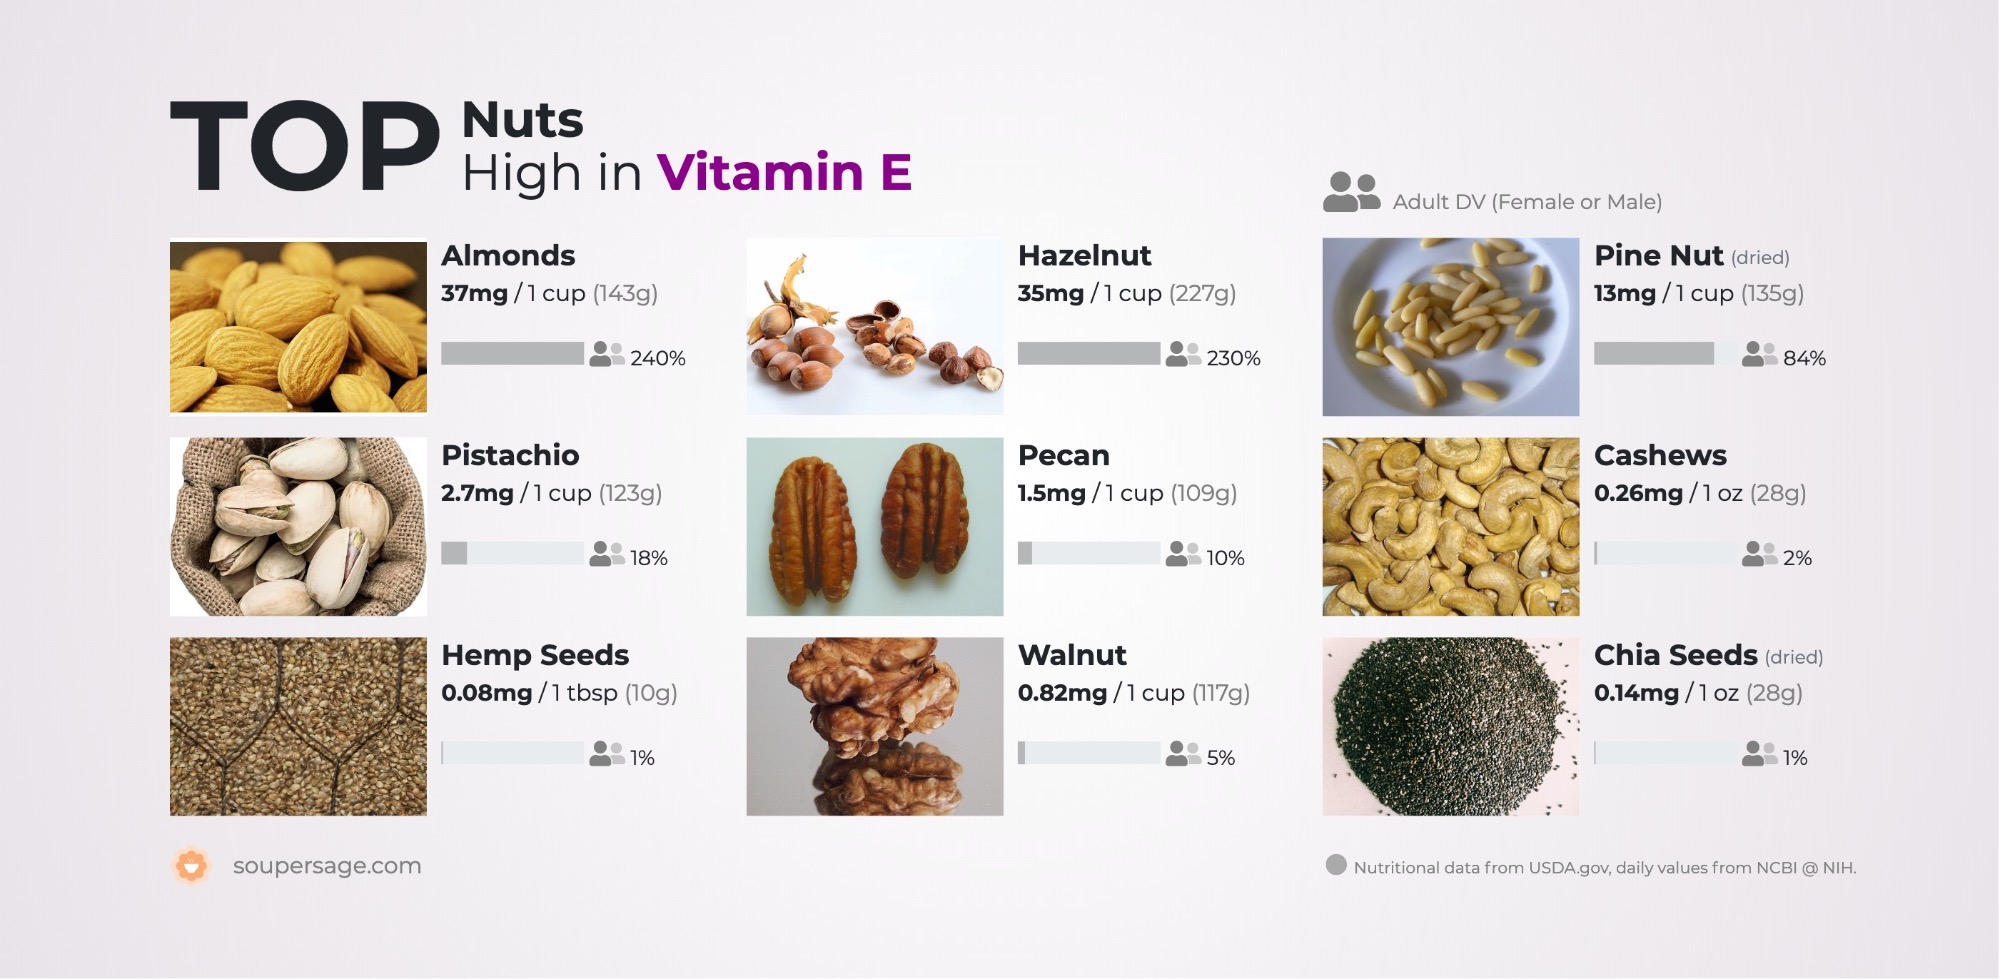 image of Top Nuts High in Vitamin E